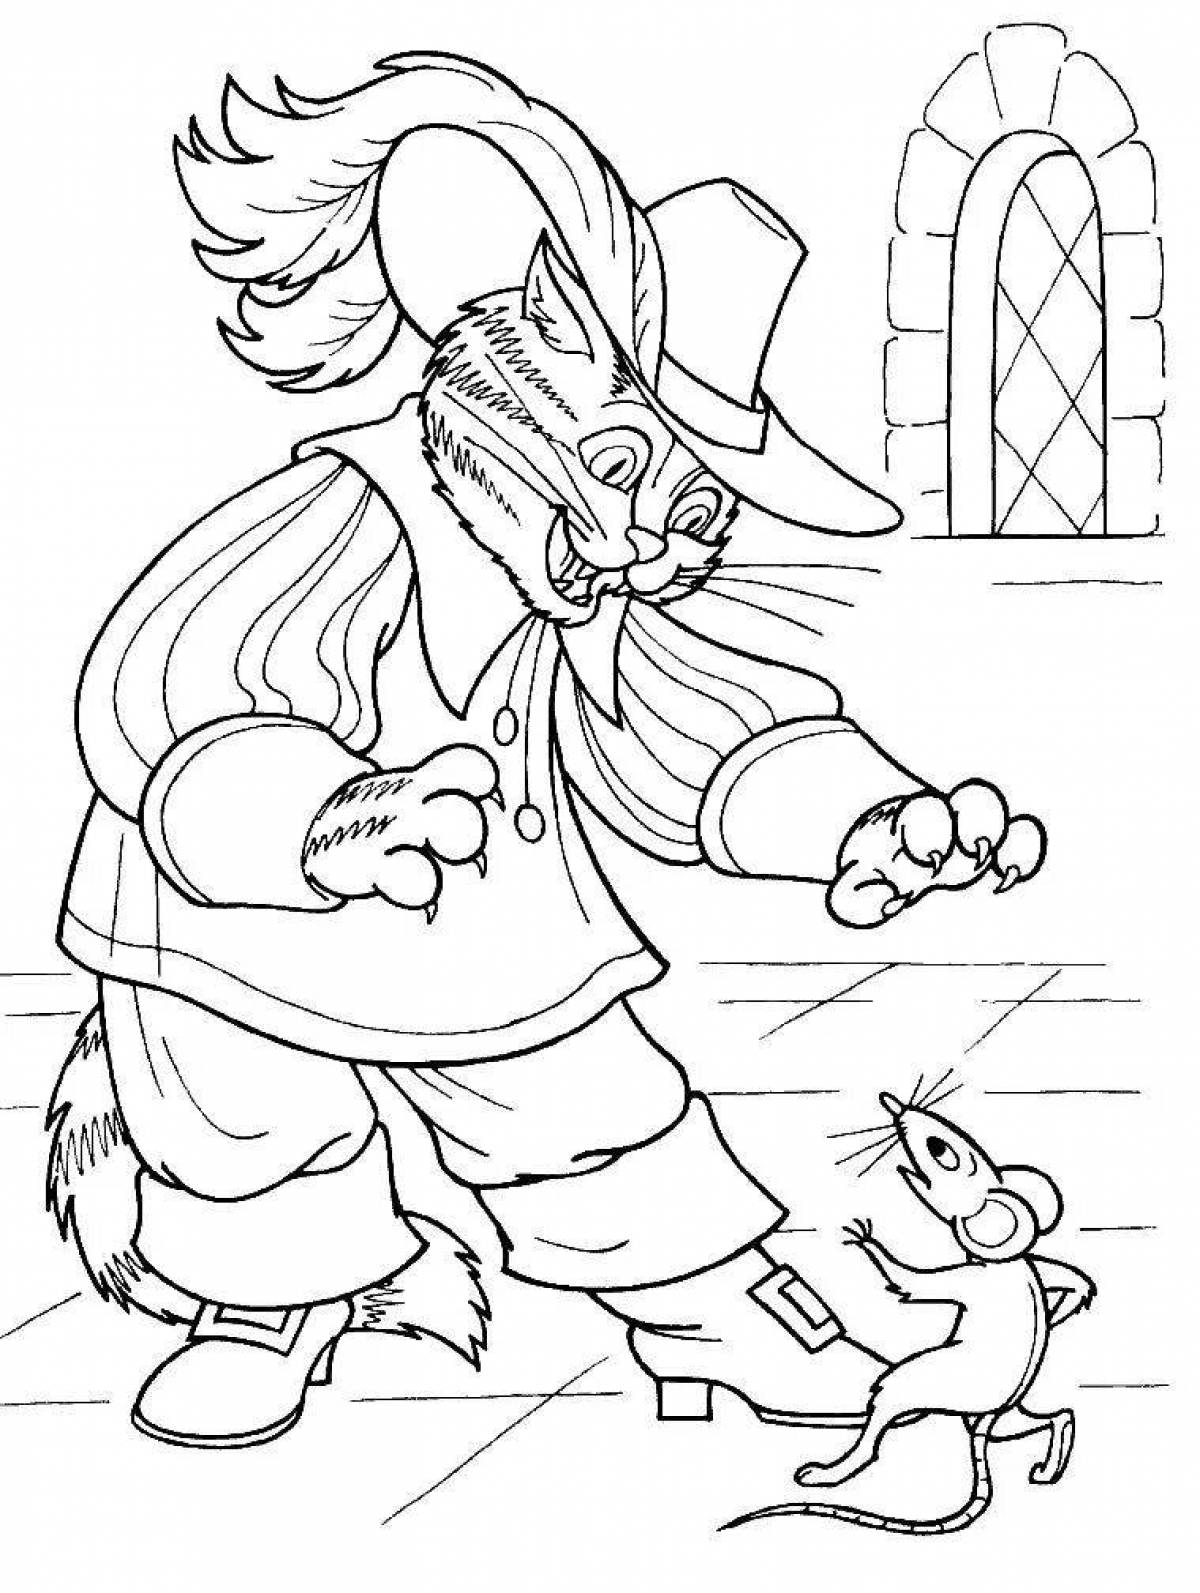 Charles Perrault's awesome Puss in Boots coloring book